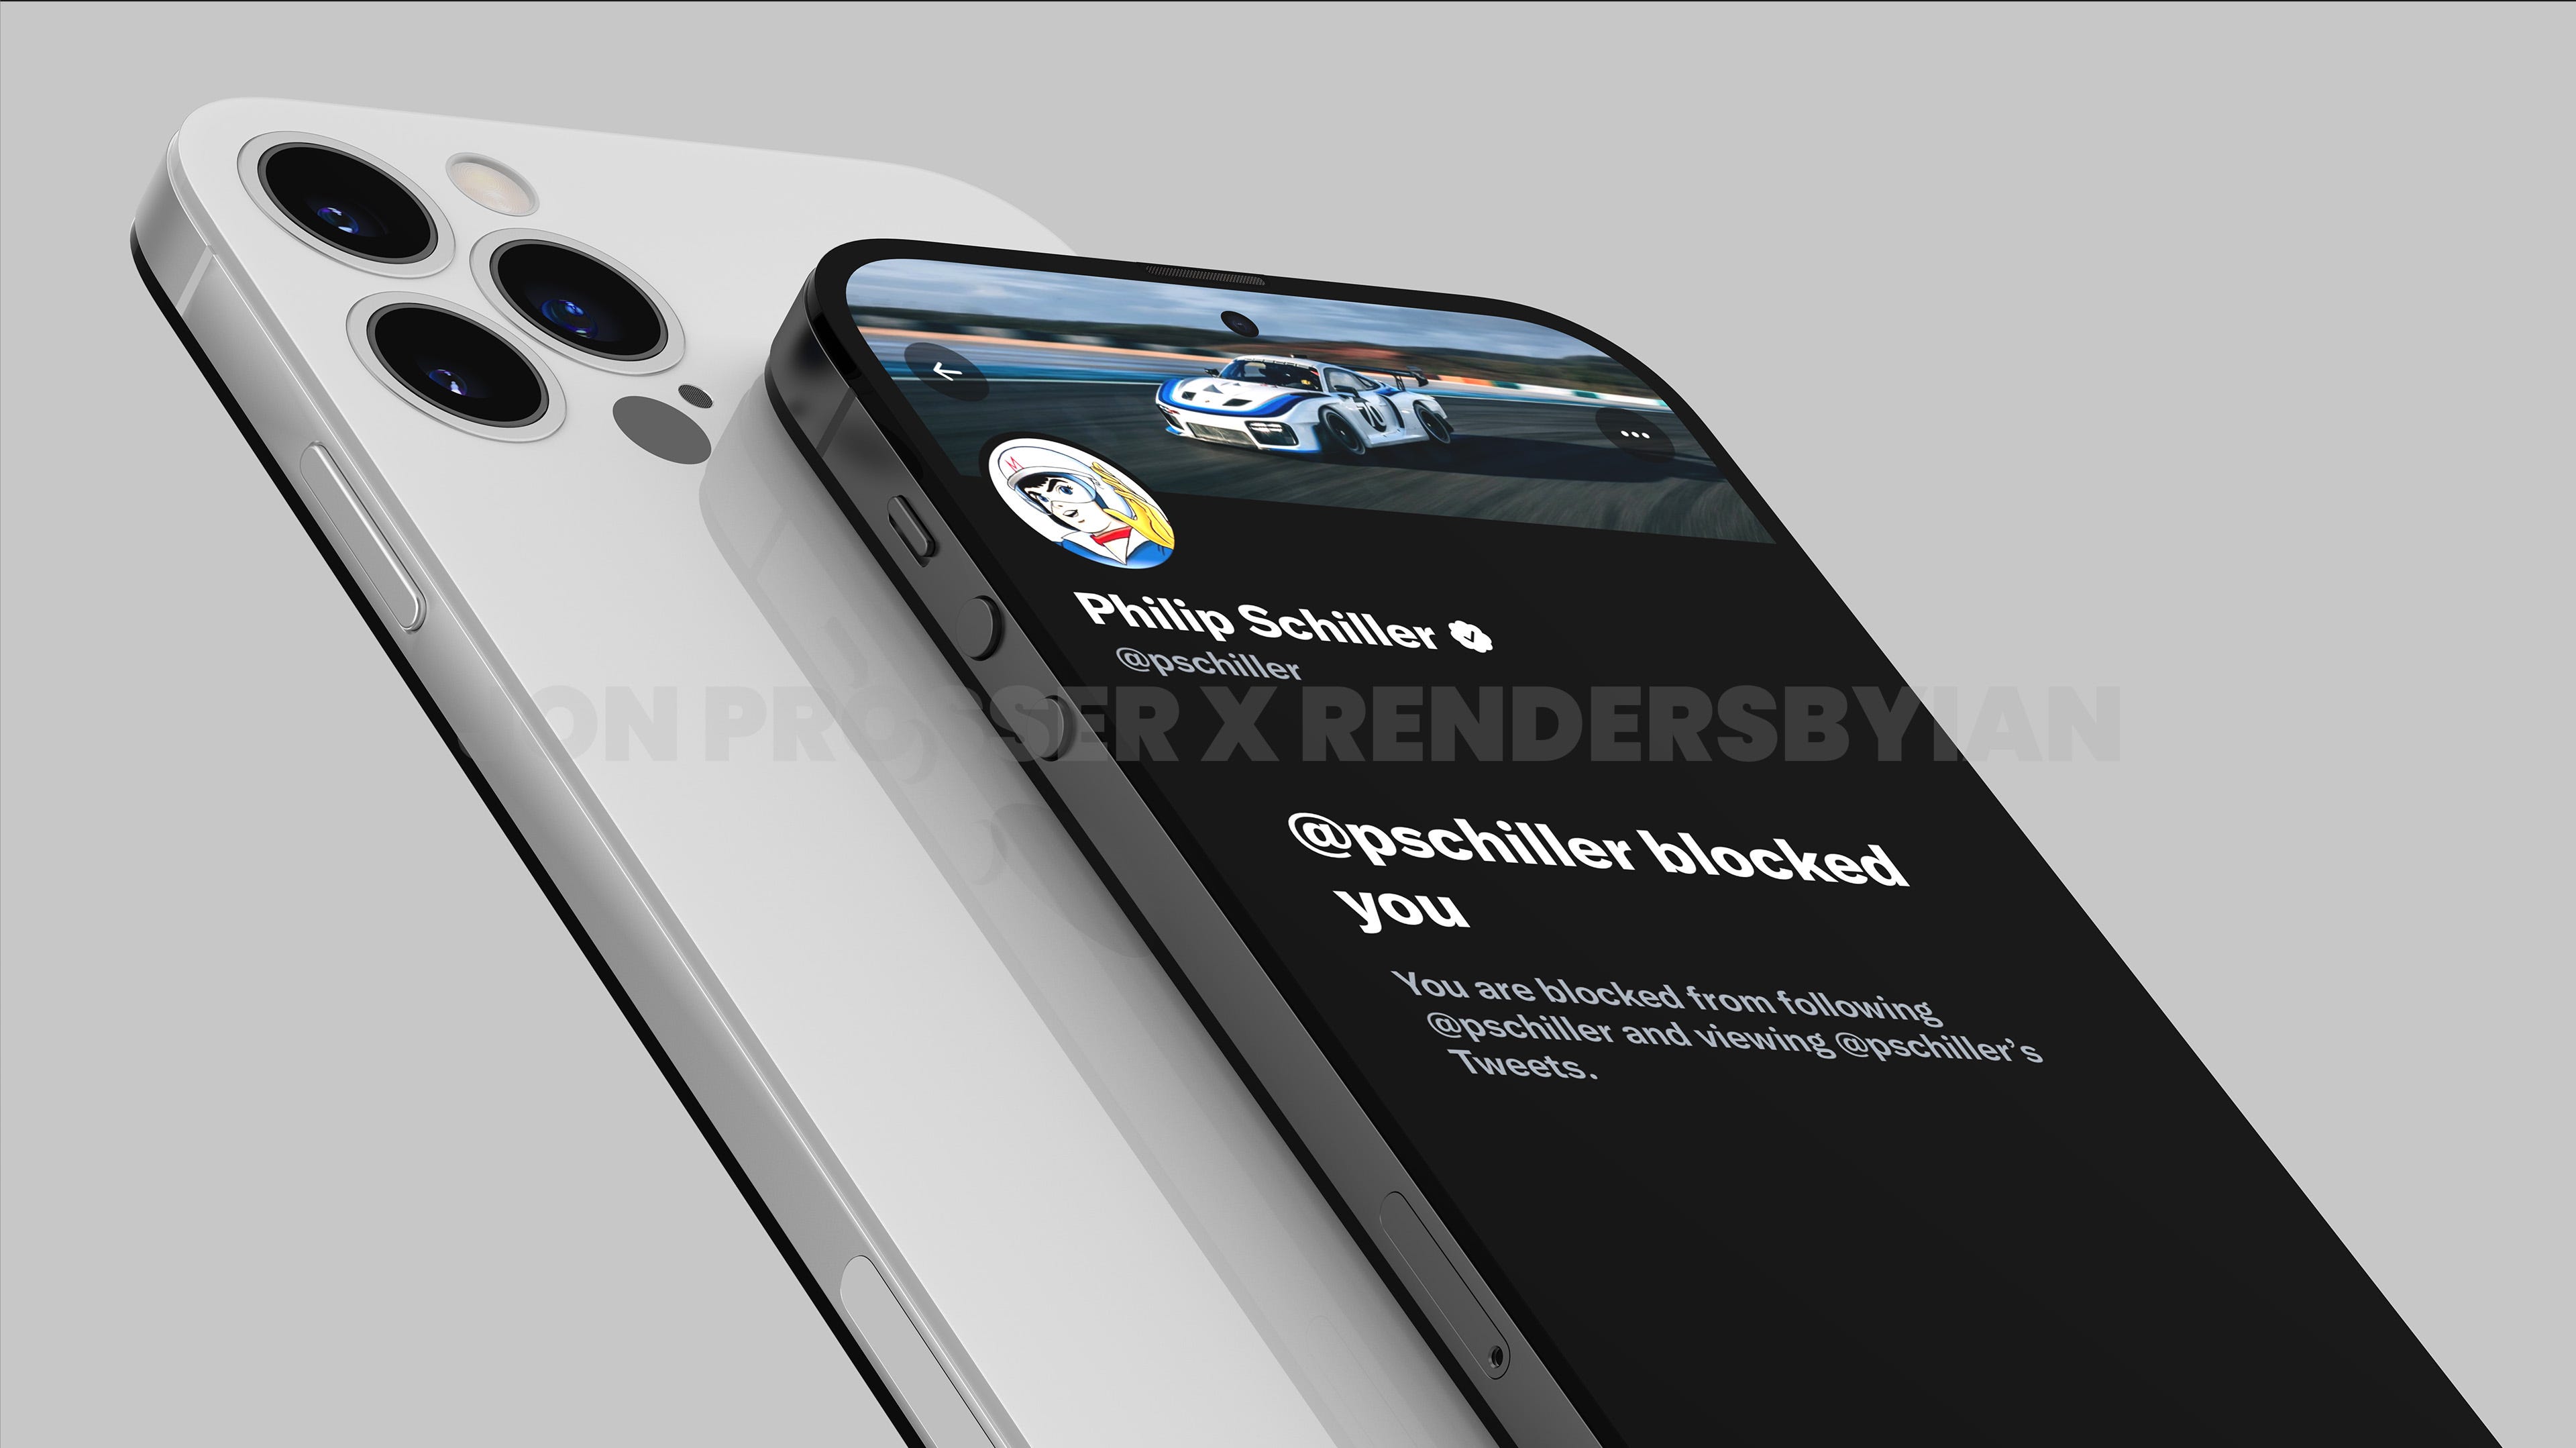 iPhone 14 Rumors: Everything We Expect for Apple's 2022 Phone
                        Apple's likely to reveal the iPhone 14 on Sept. 7. Here's what we've heard so far.